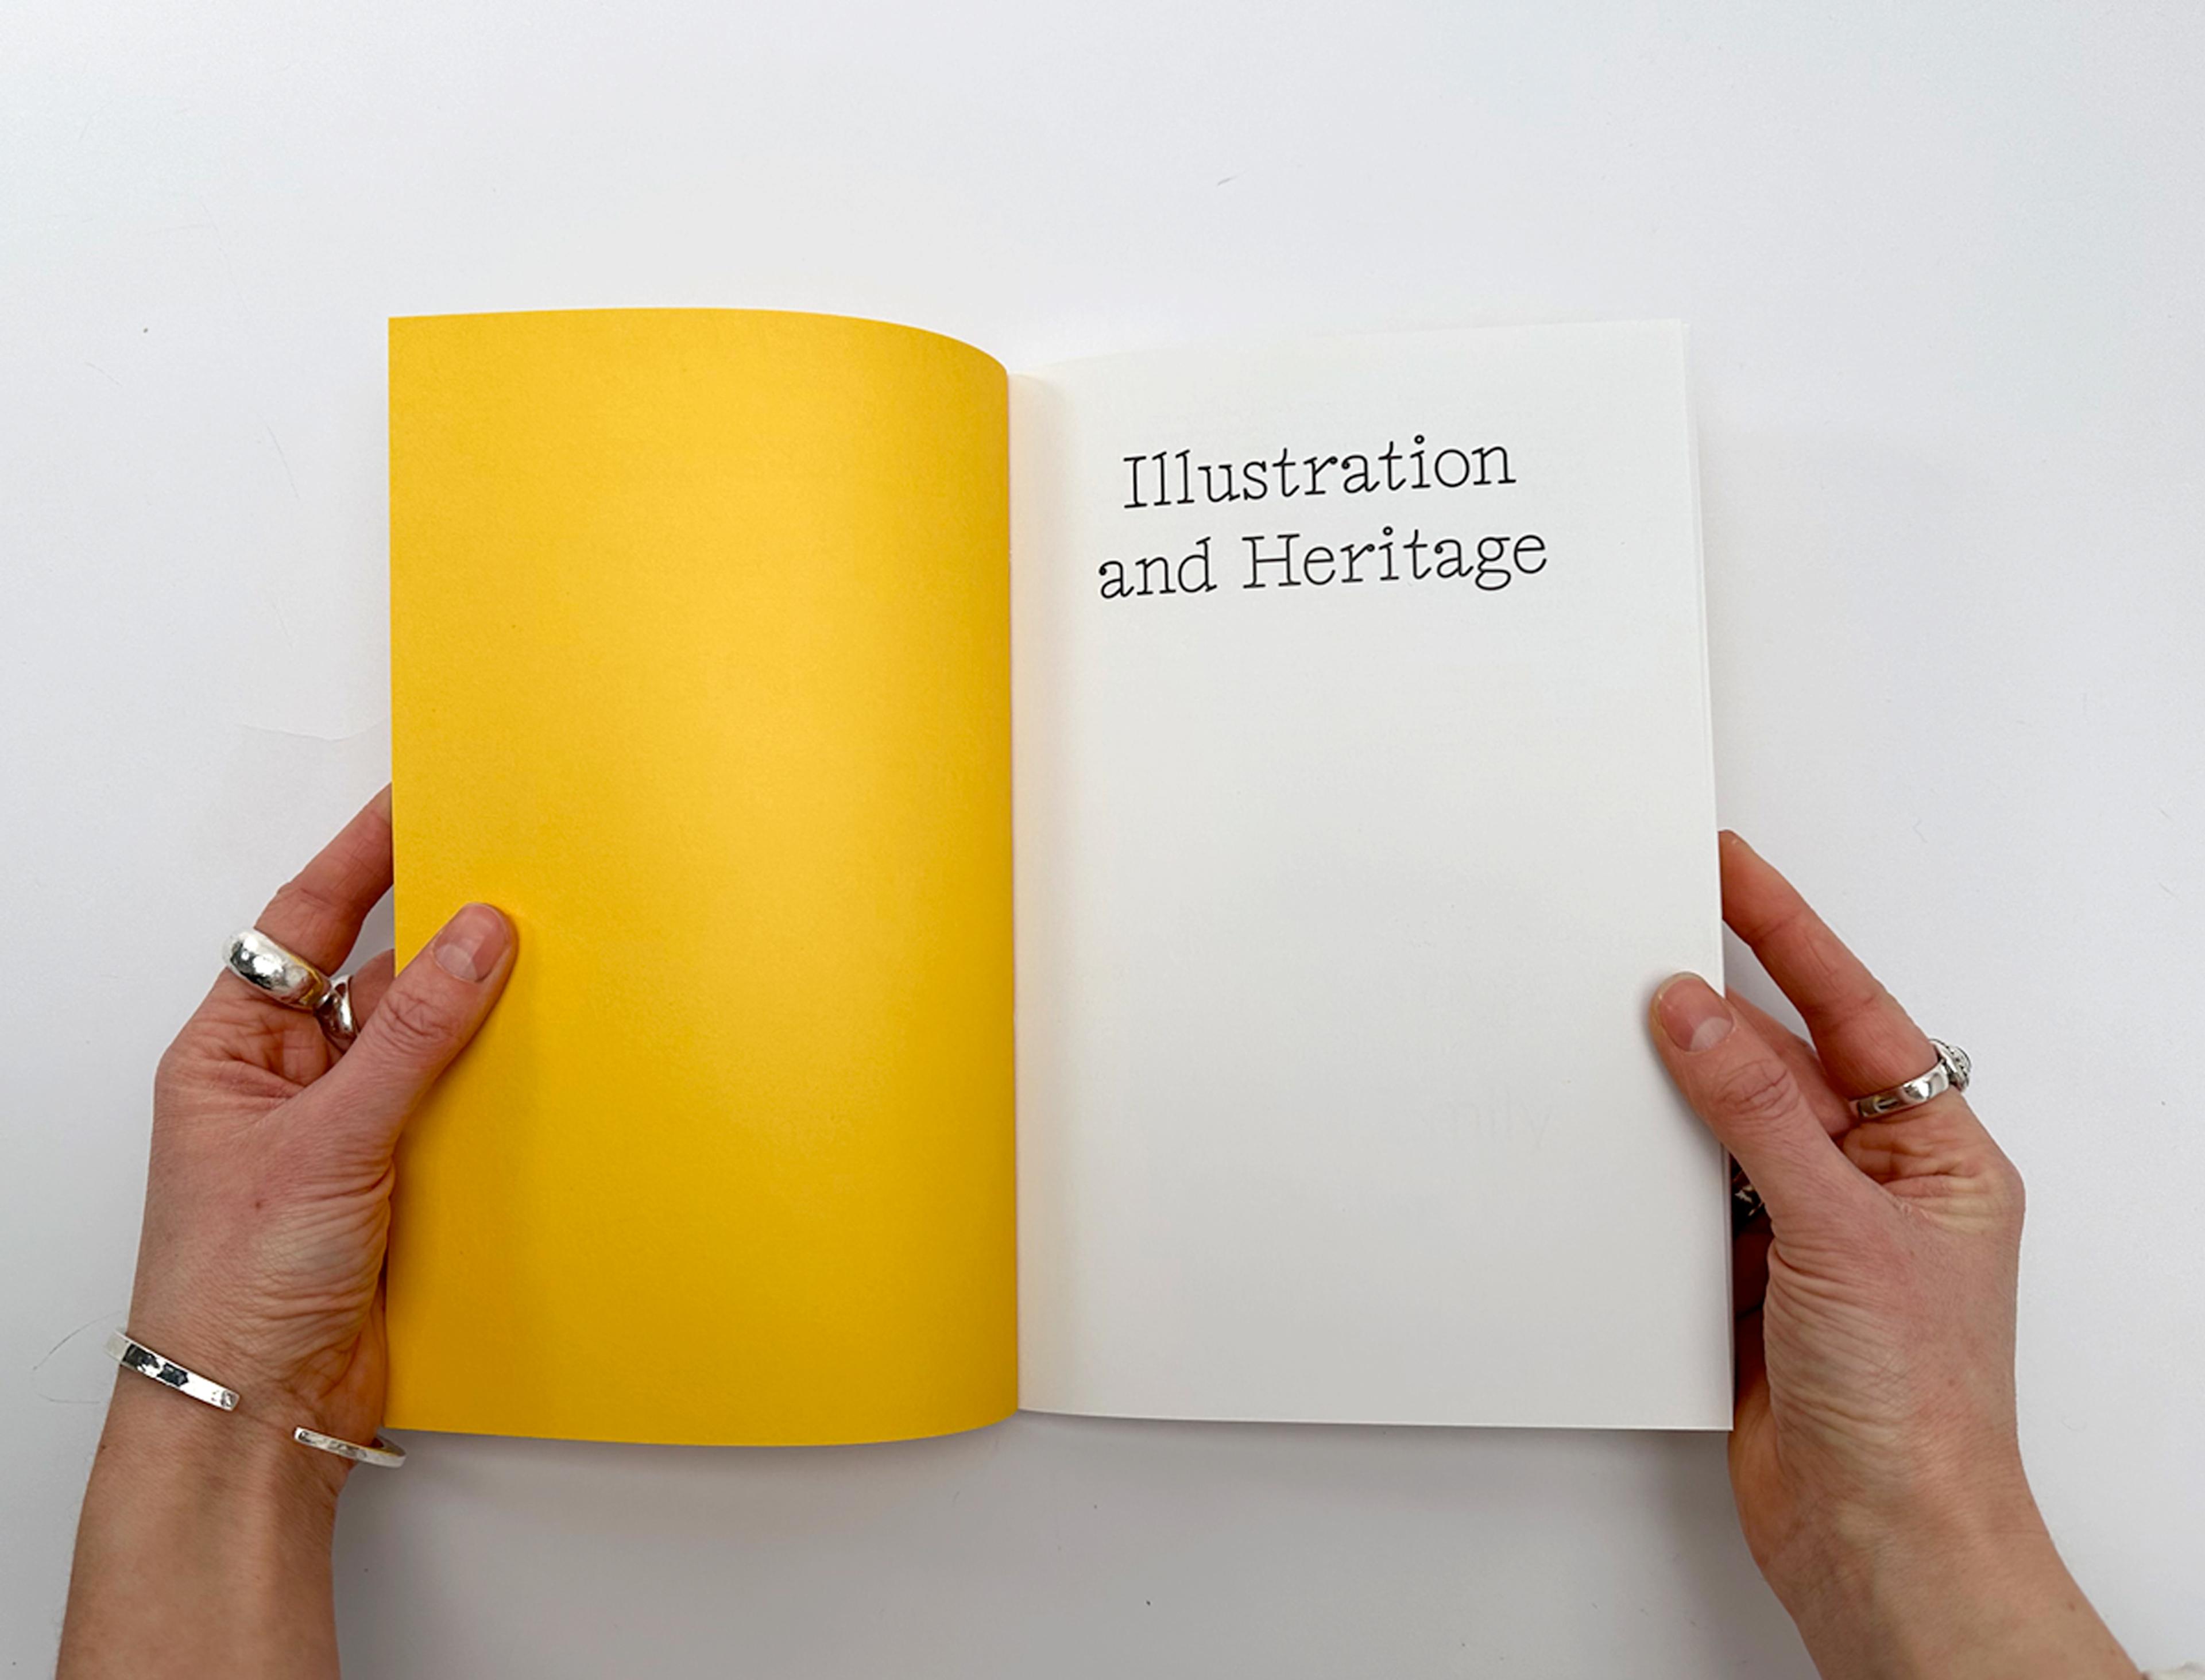 Photograph of two hands opening up a copy of the Illustration and Heritage book.